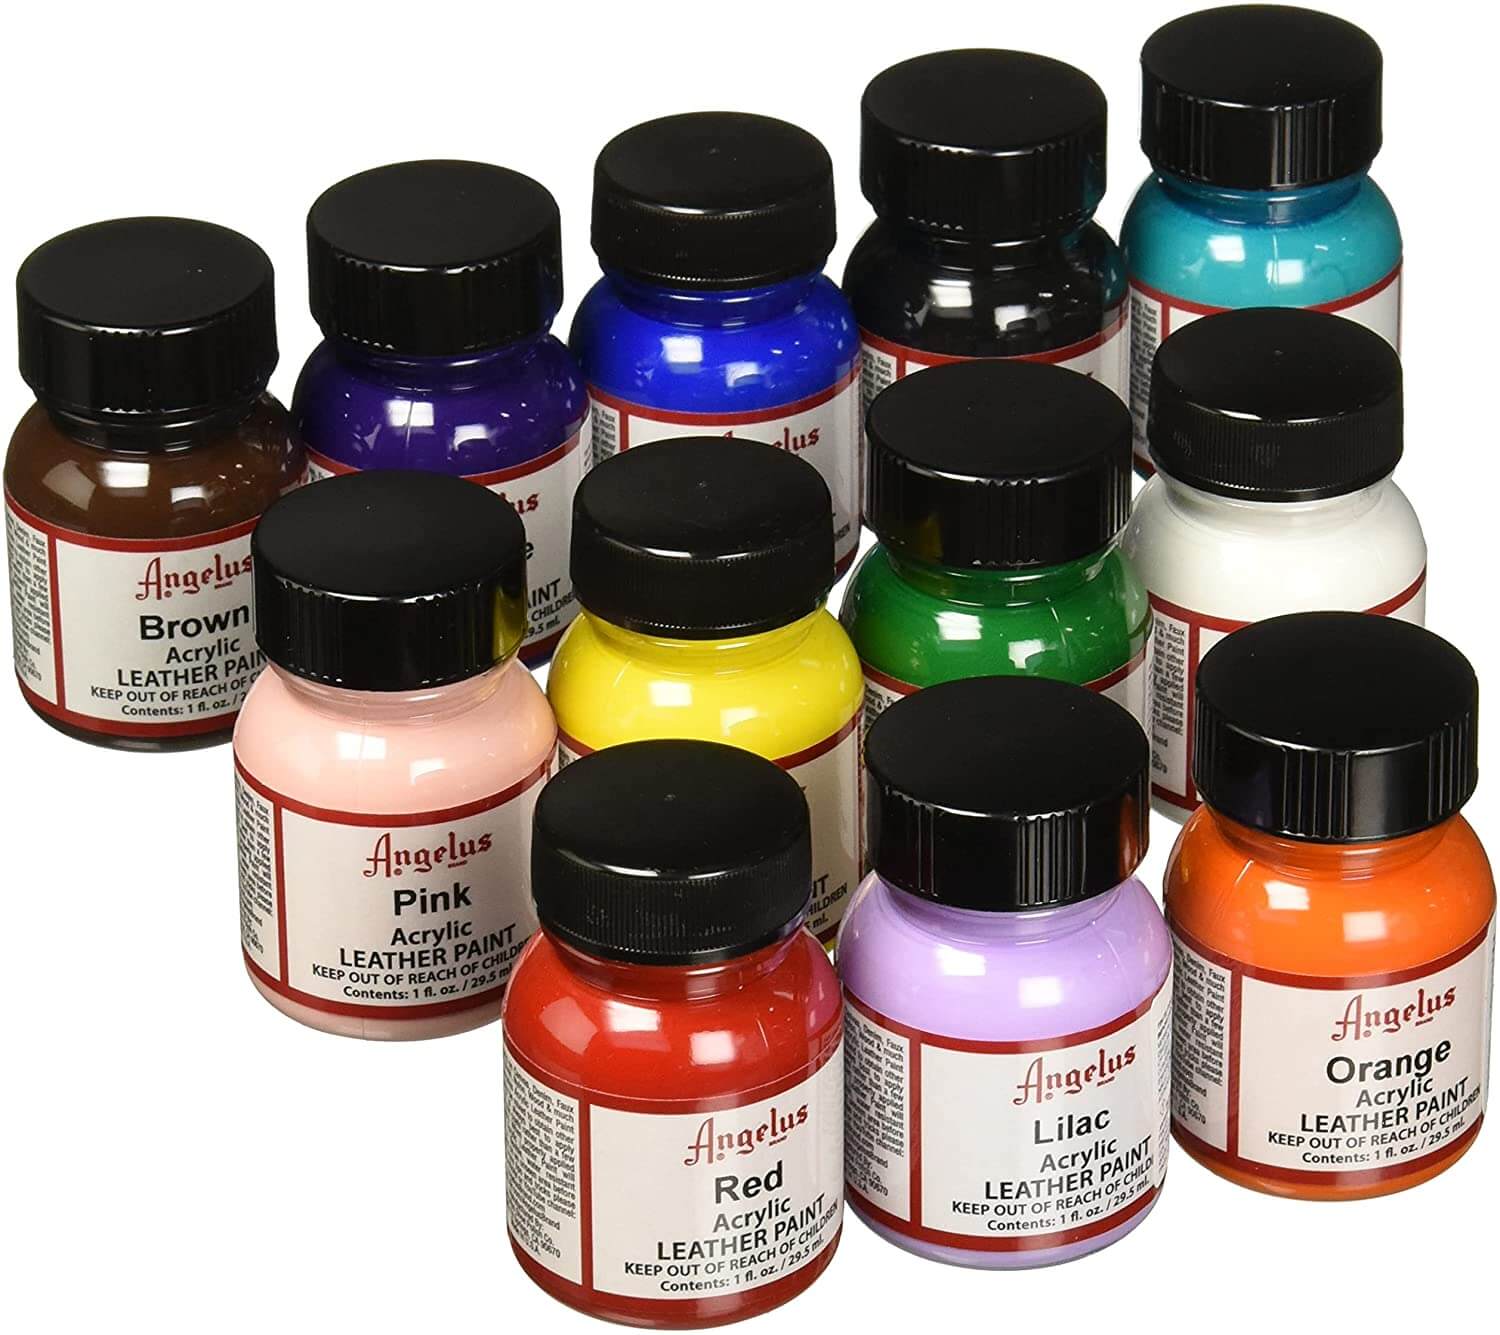 Angelus Leather Paint 4oz Starter Kit Set of Acrylic Paints For Sneakers,  Shoes, Art, Crafts, Jackets, Shirts- Flexible, Made in USA